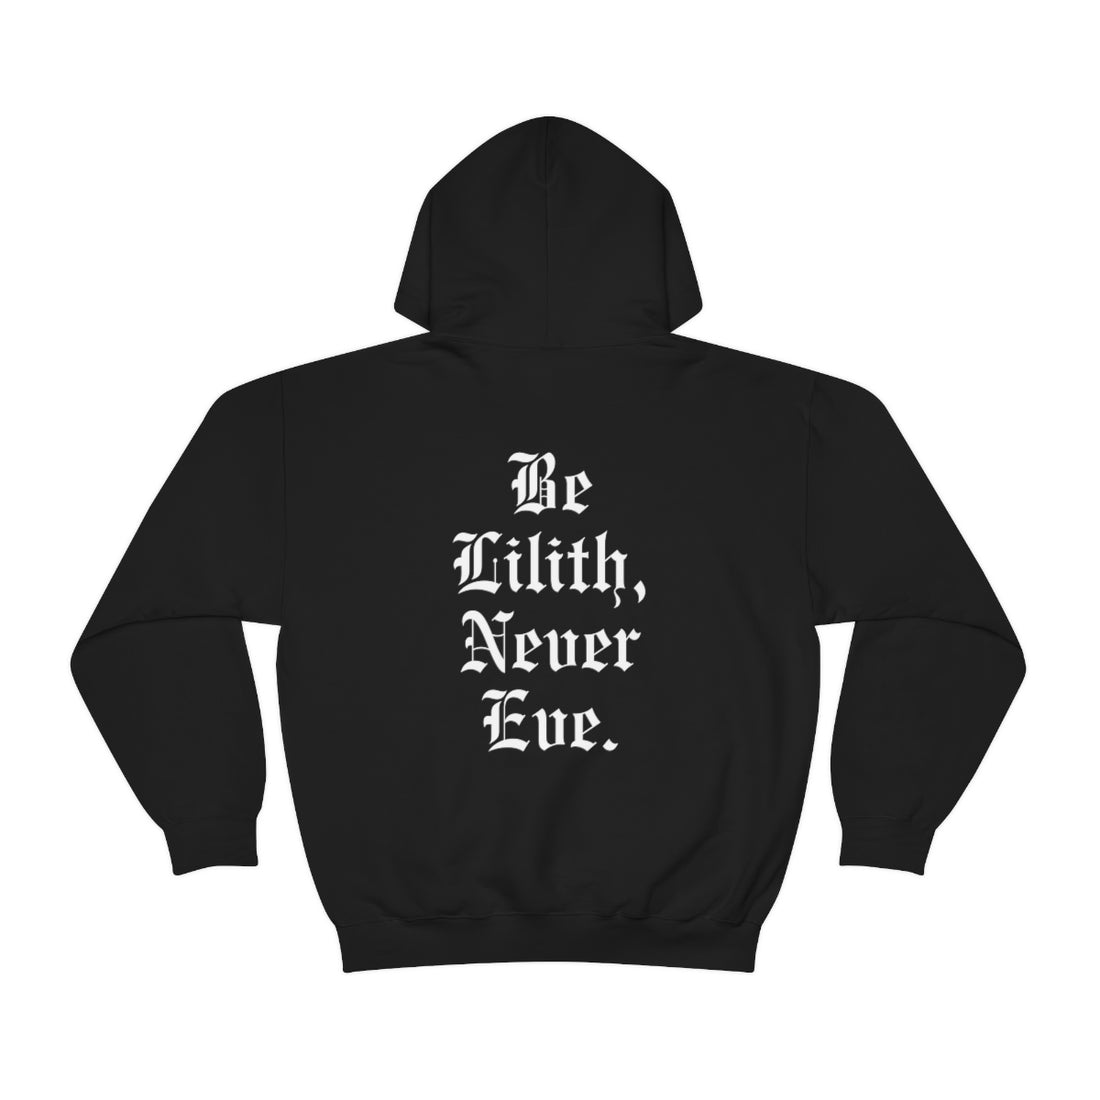 Be Lilith, Never Eve Hoodie